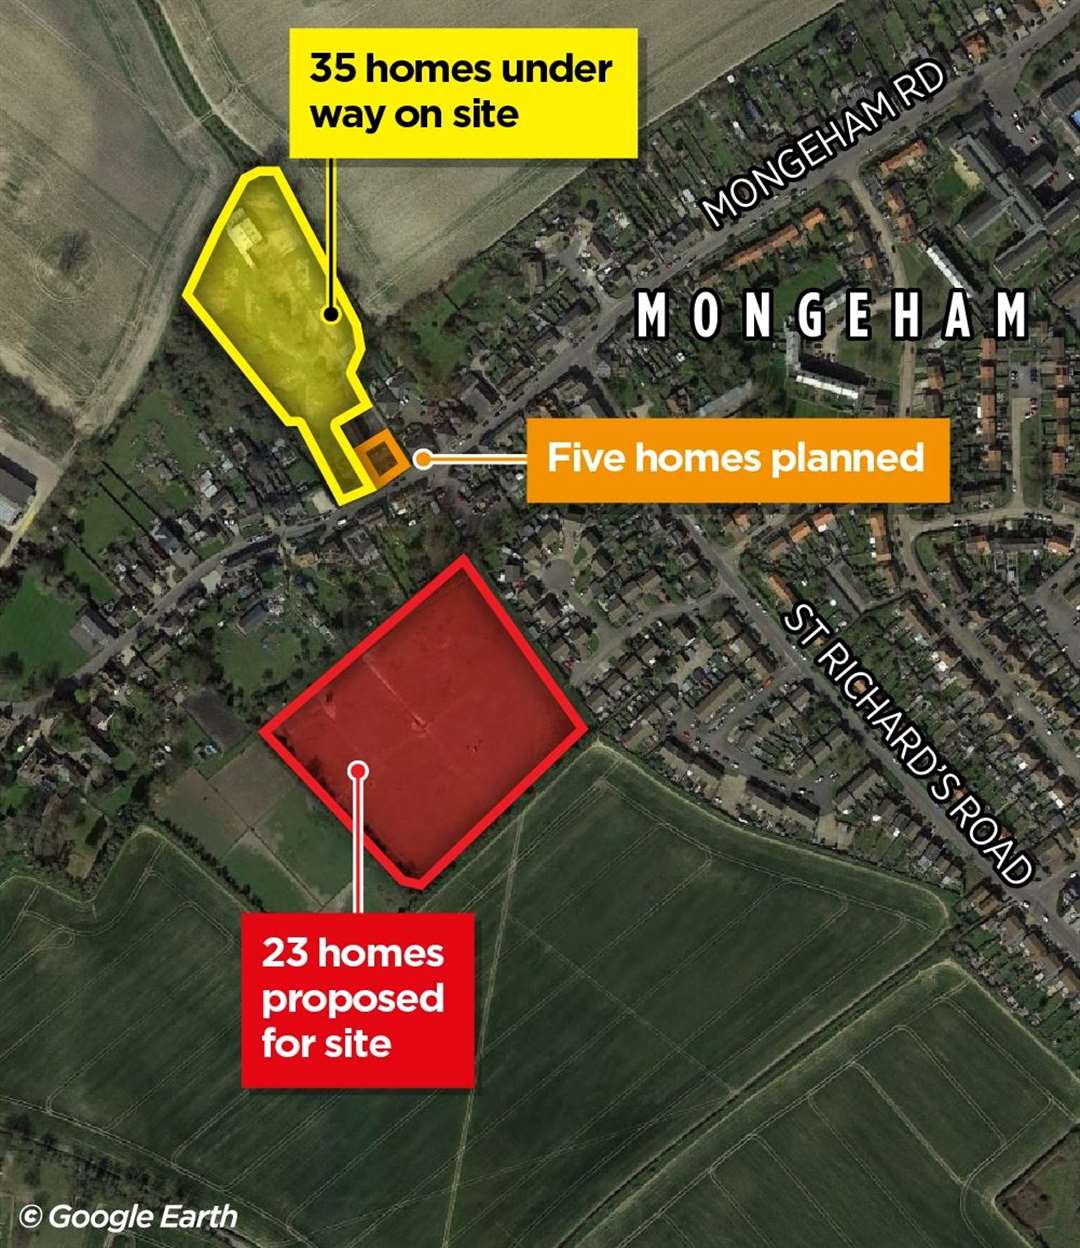 A number of new housing developments are earmarked for Great Mongeham near Deal